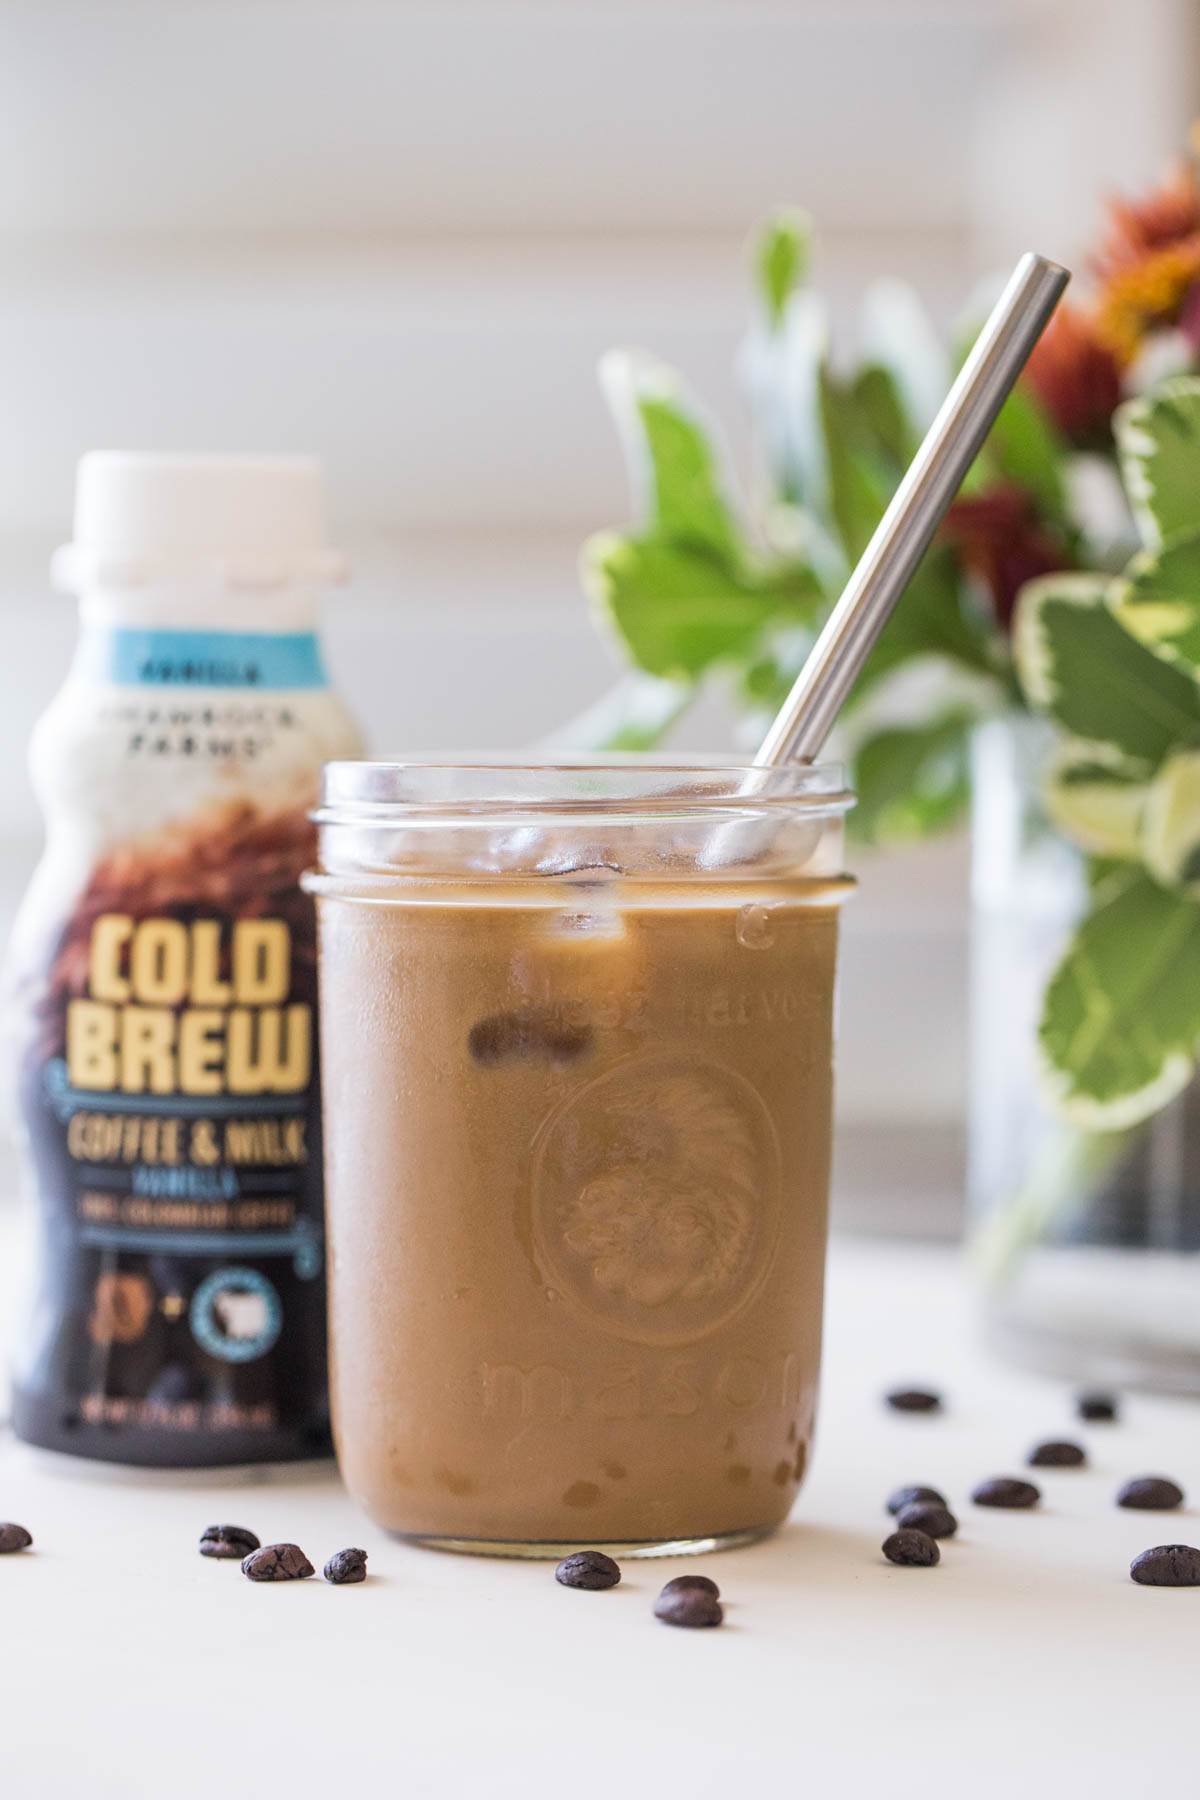 Shamrock Farms Cold Brew Coffee is a great way to enjoy a little treat during this busy season and power through that afternoon slump!